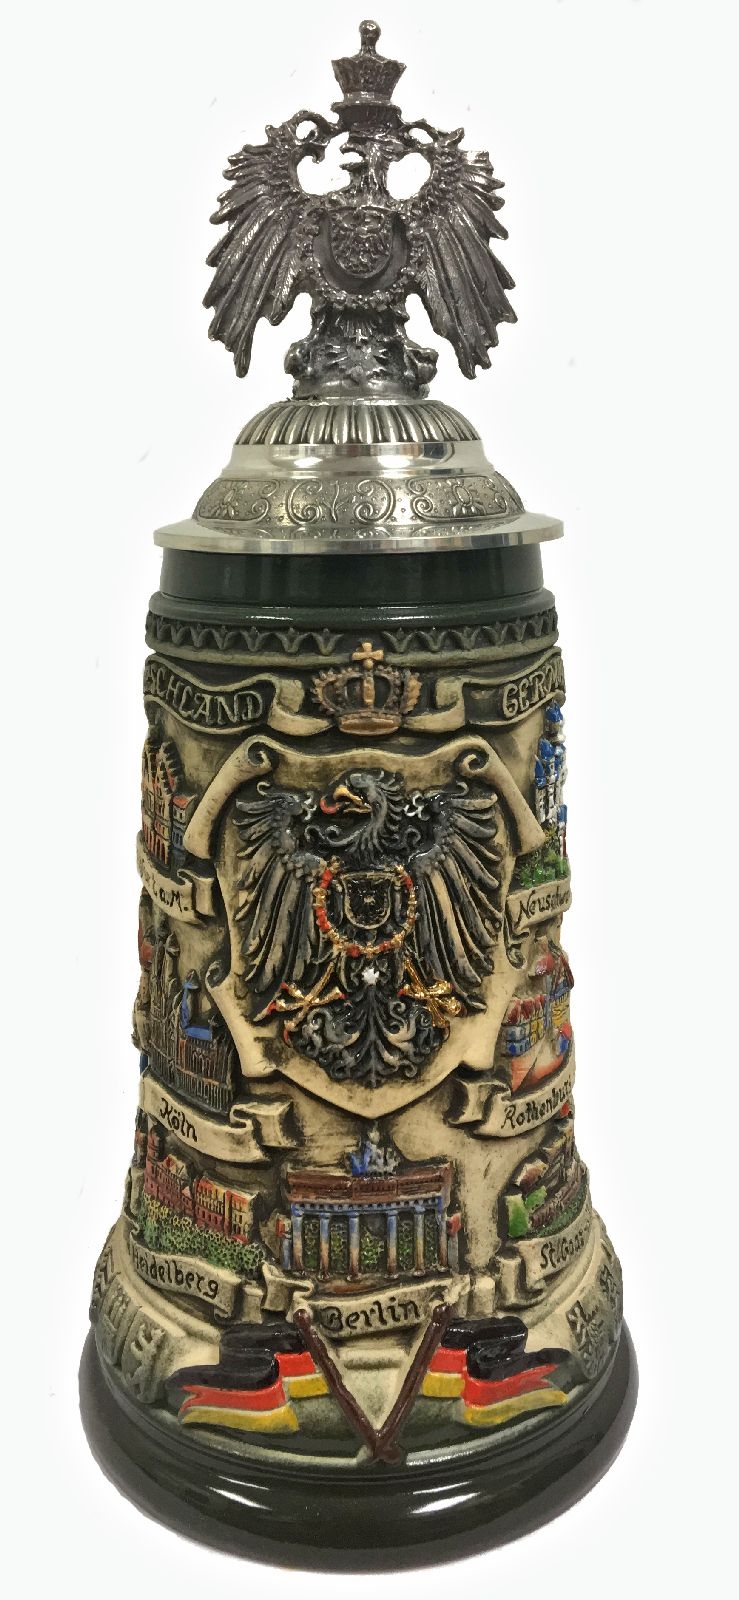 Deutschland Germany City Panorama with 3D Eagle Lid LE German Beer Stein .75 L